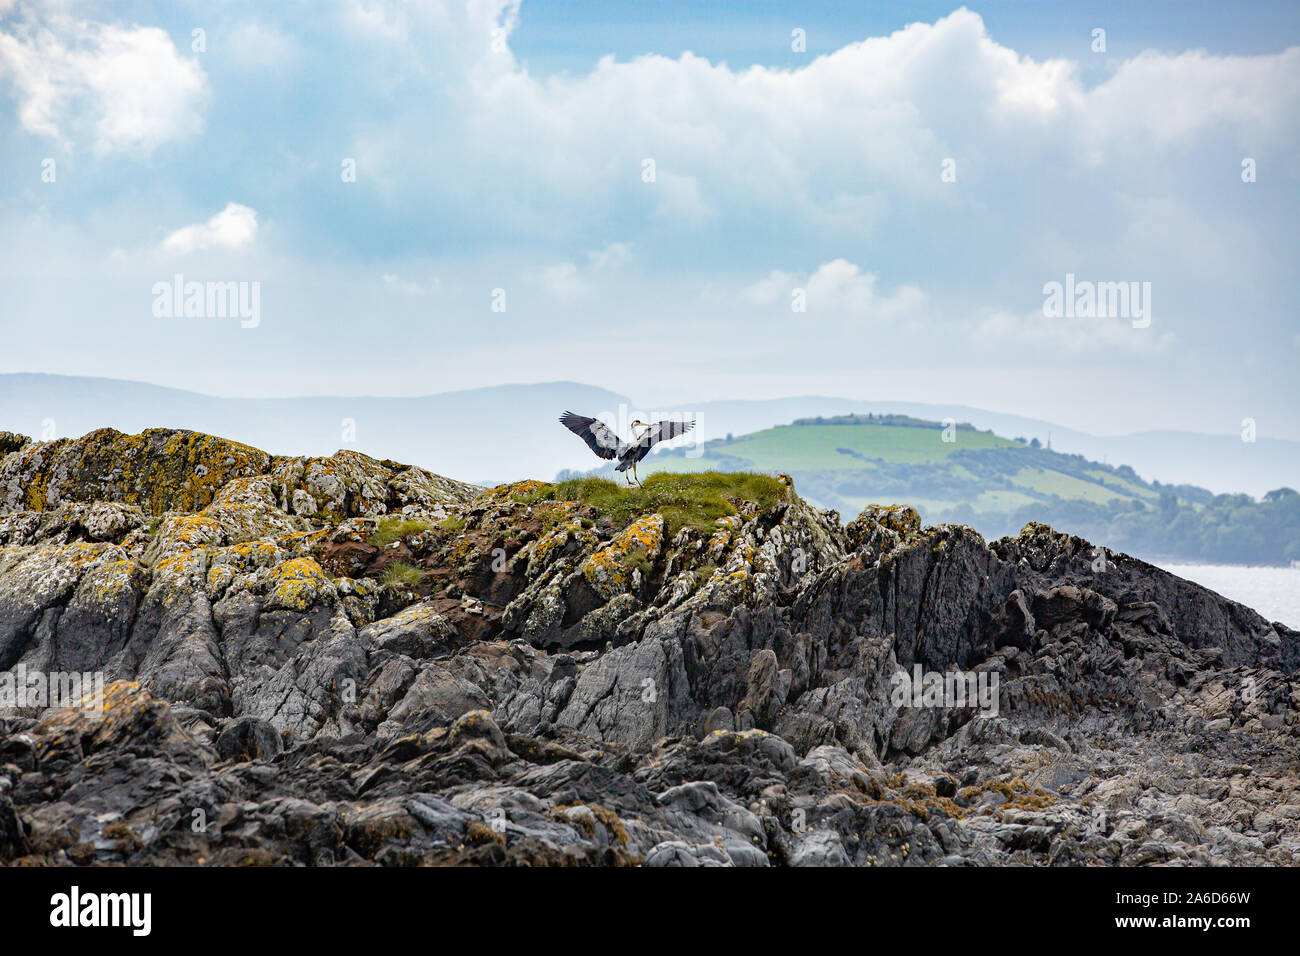 Grey heron (Ardea cinerea) resting and waiting for prey on the rocks of the Bantry Bay coastline. West Cork, Ireland. Stock Photo